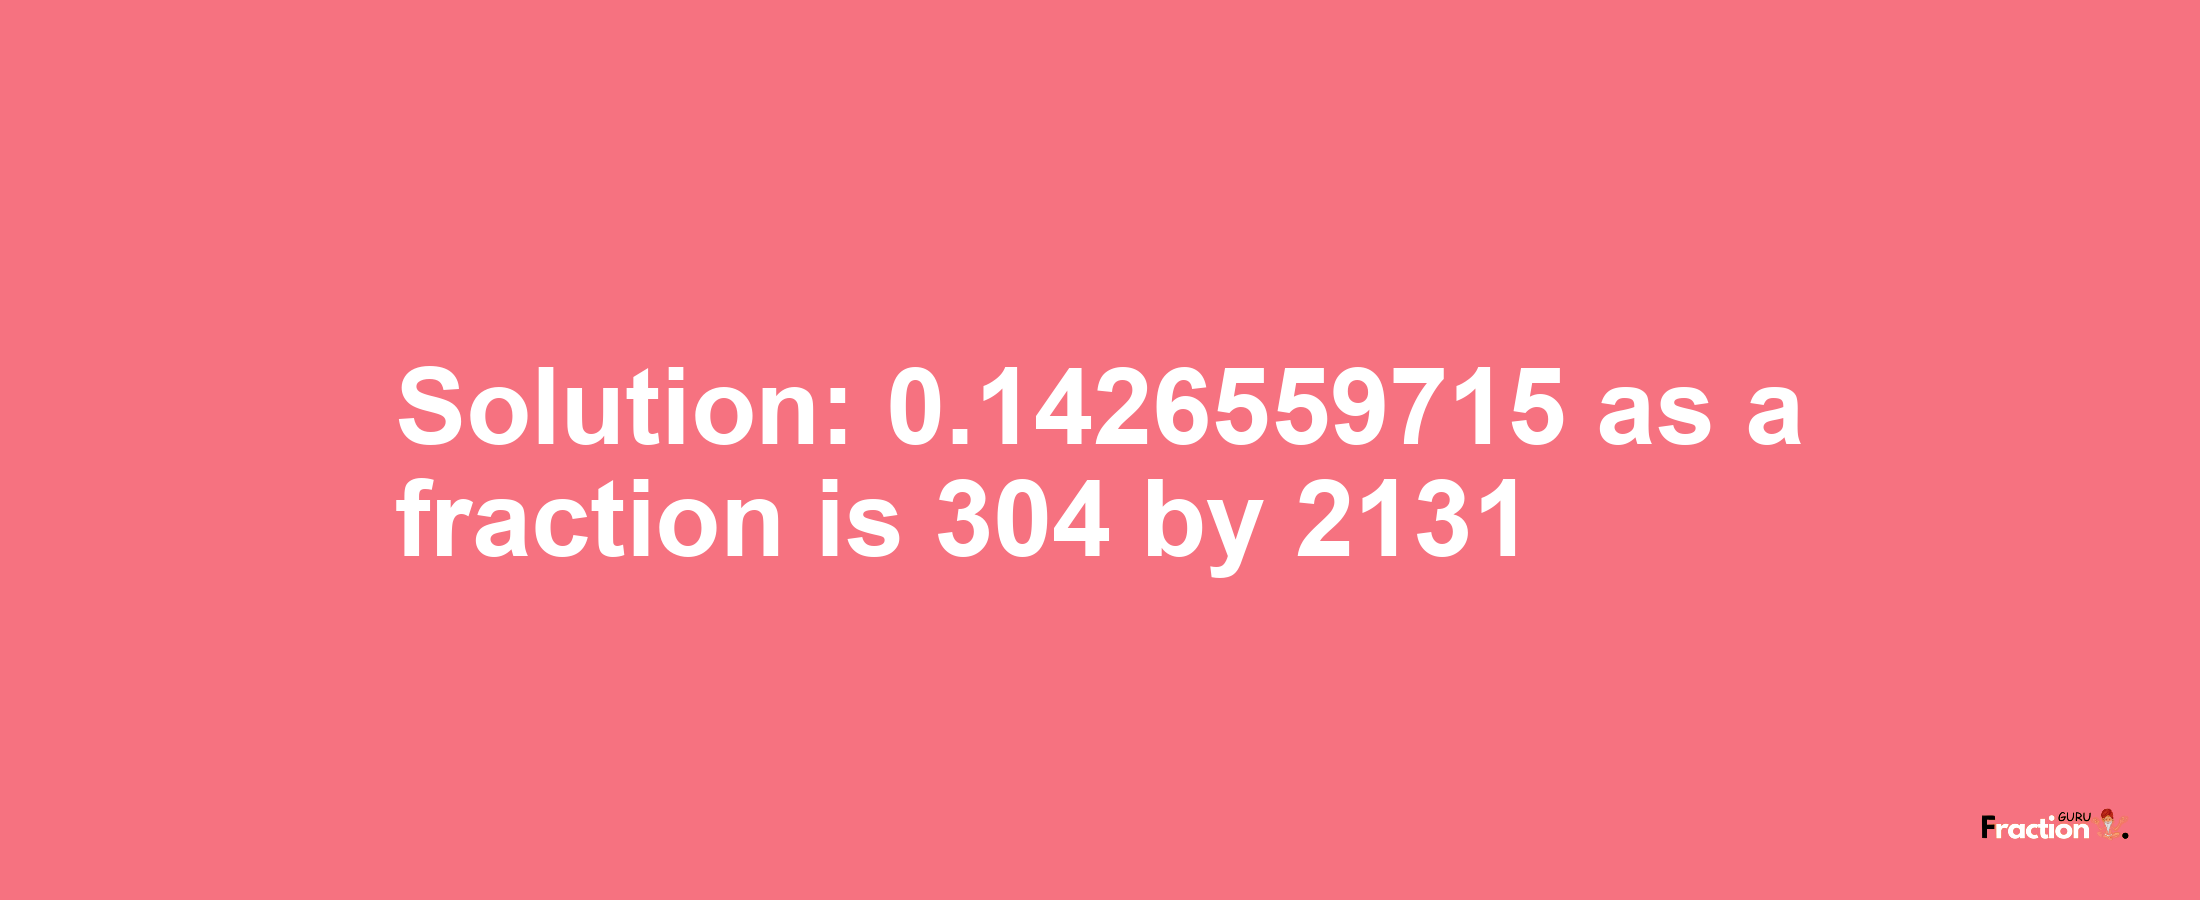 Solution:0.1426559715 as a fraction is 304/2131